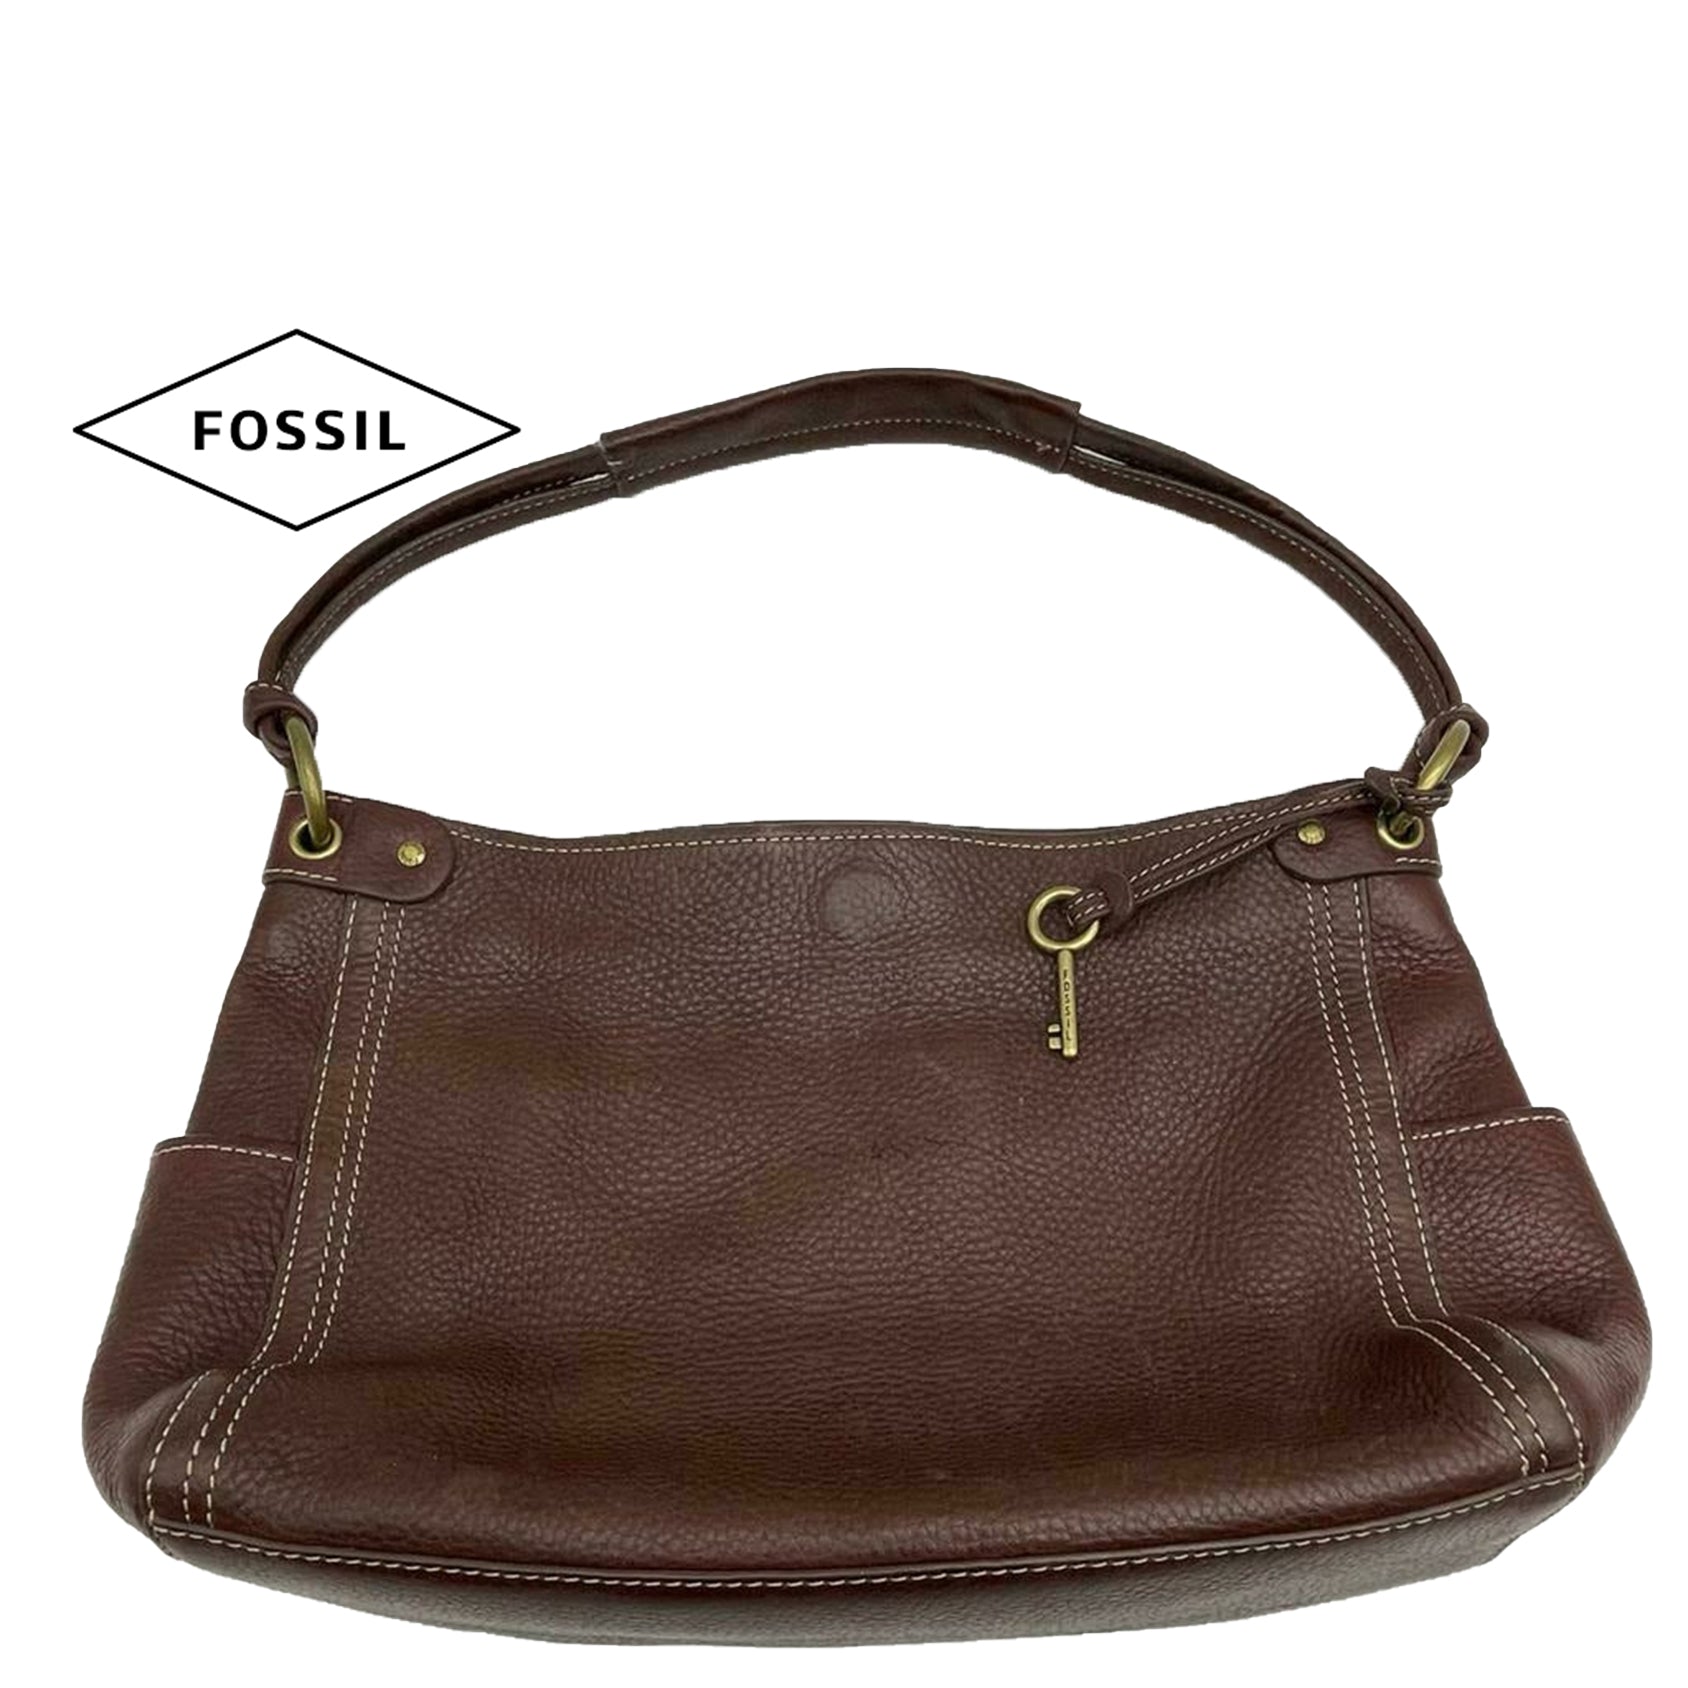 Fossil Black Pebbled Leather Purse - Ruby Lane